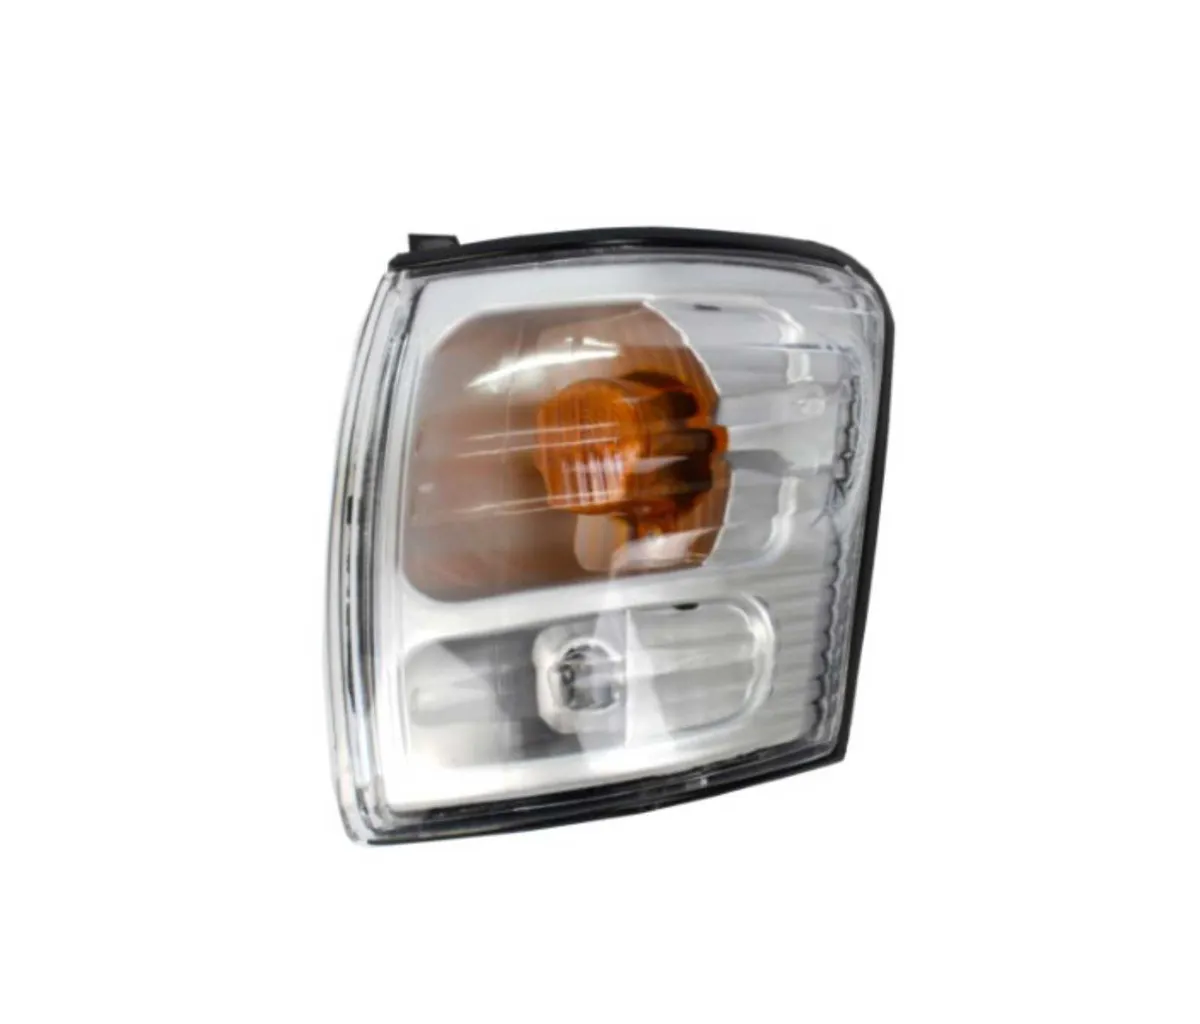 Toyota Hilux 2001-2005 Front Indicator Side Lamps - Image 1